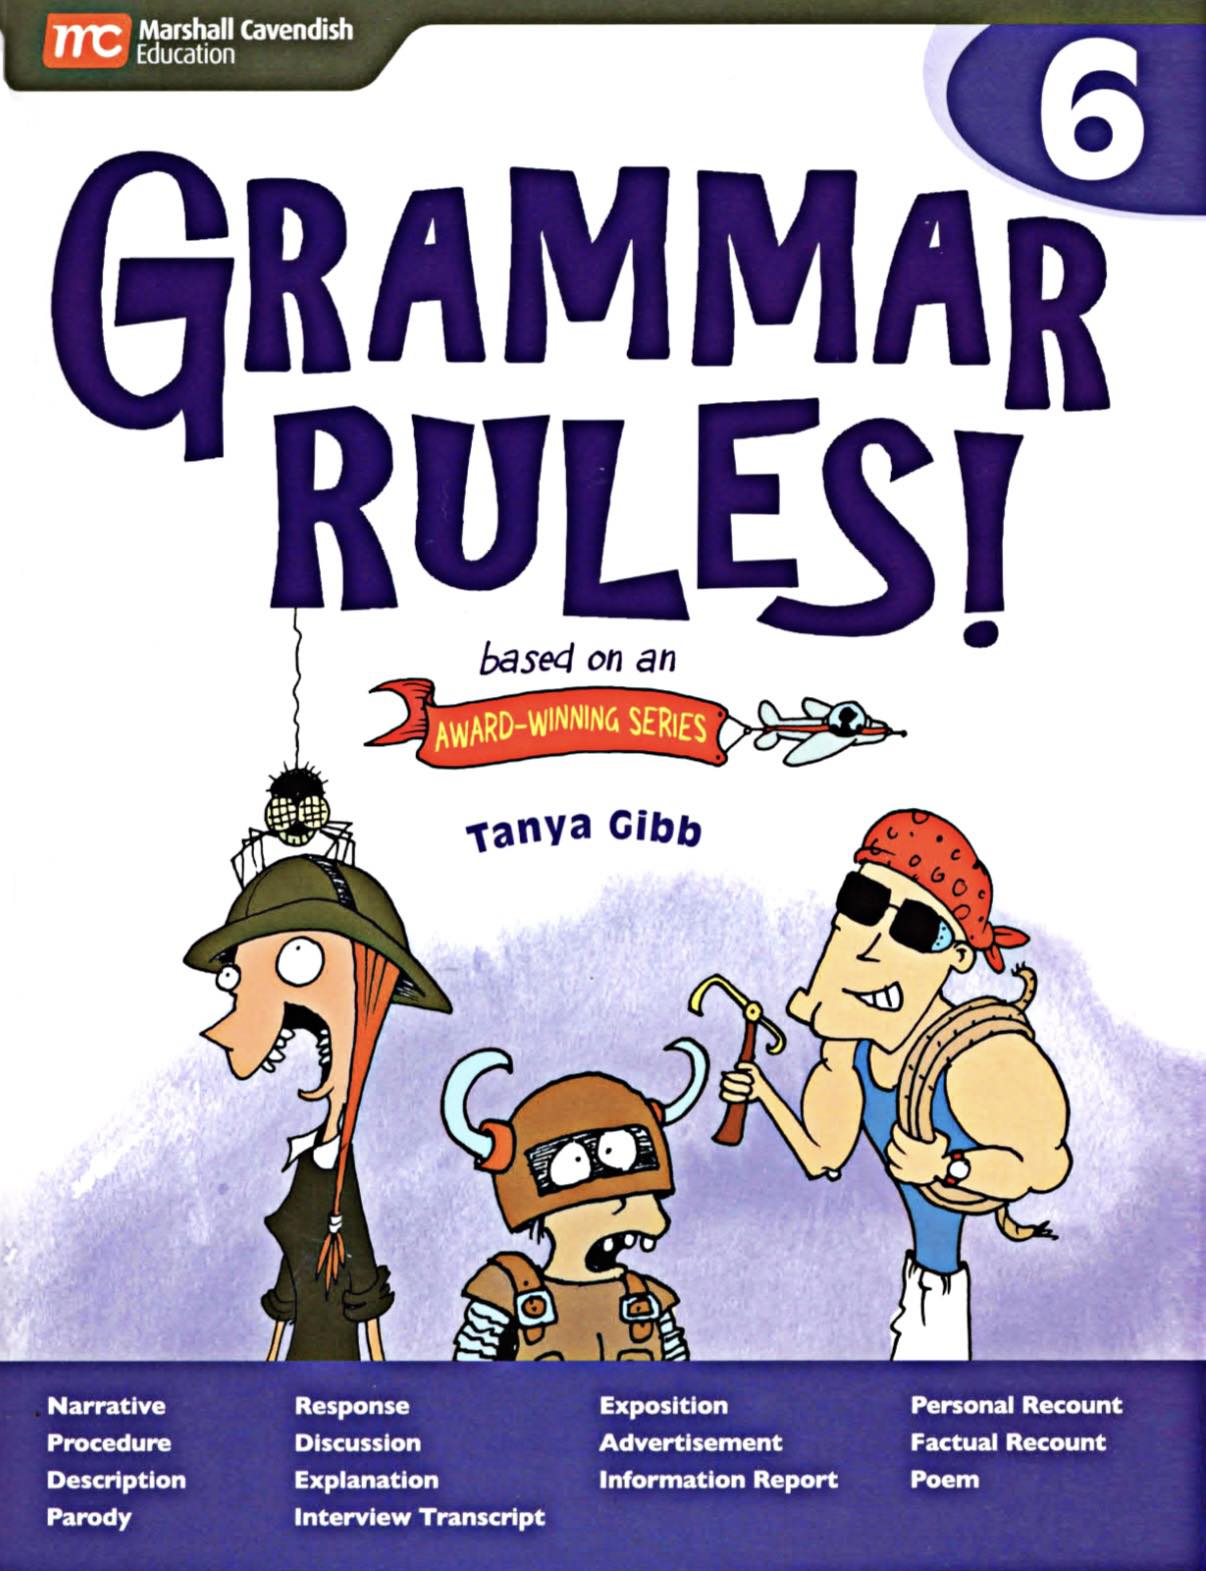 Grammar Rules! for Primary Levels